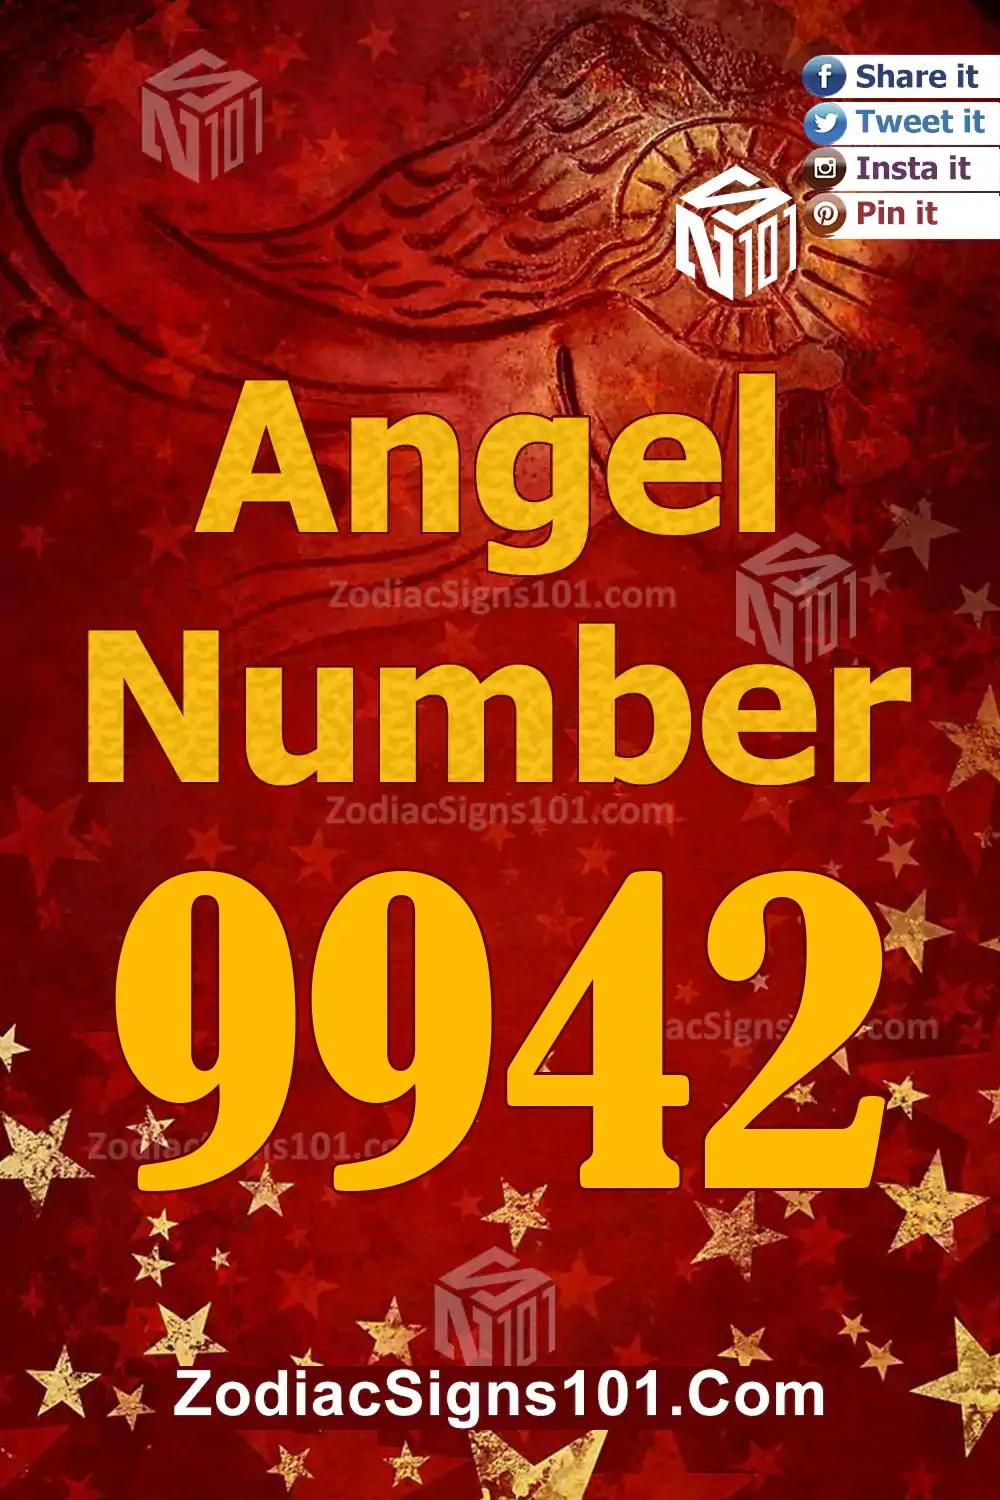 9942 Angel Number Meaning